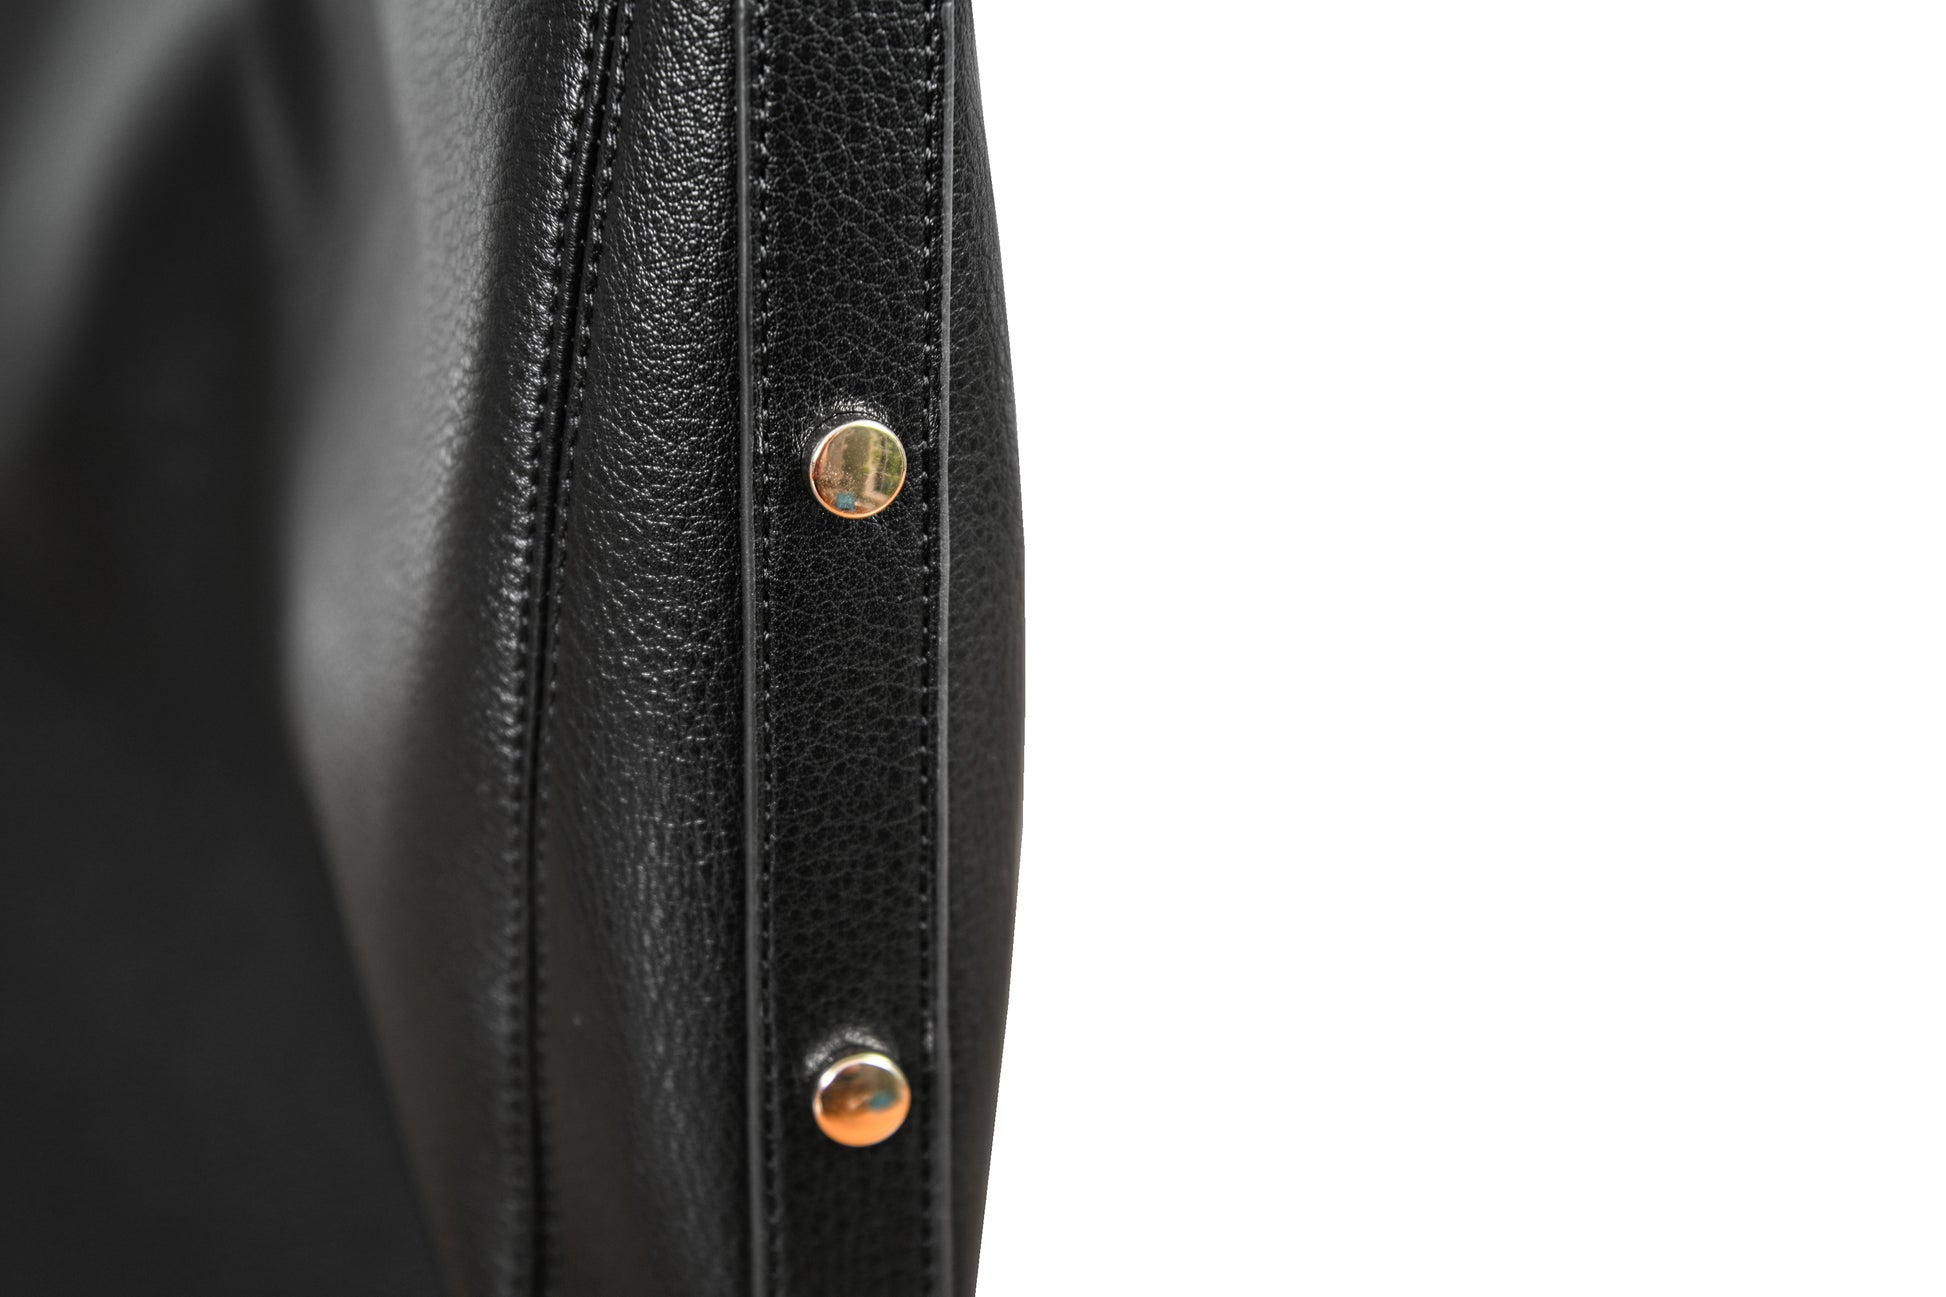 Luna Midnight Black Crescent Pebble Grain Faux Leather Handbag made by Dewi Maya detail photo of gold rivets available at the best boutique in Upstate South Carolina Spartanburg Greenville Dewi Maya Boutique